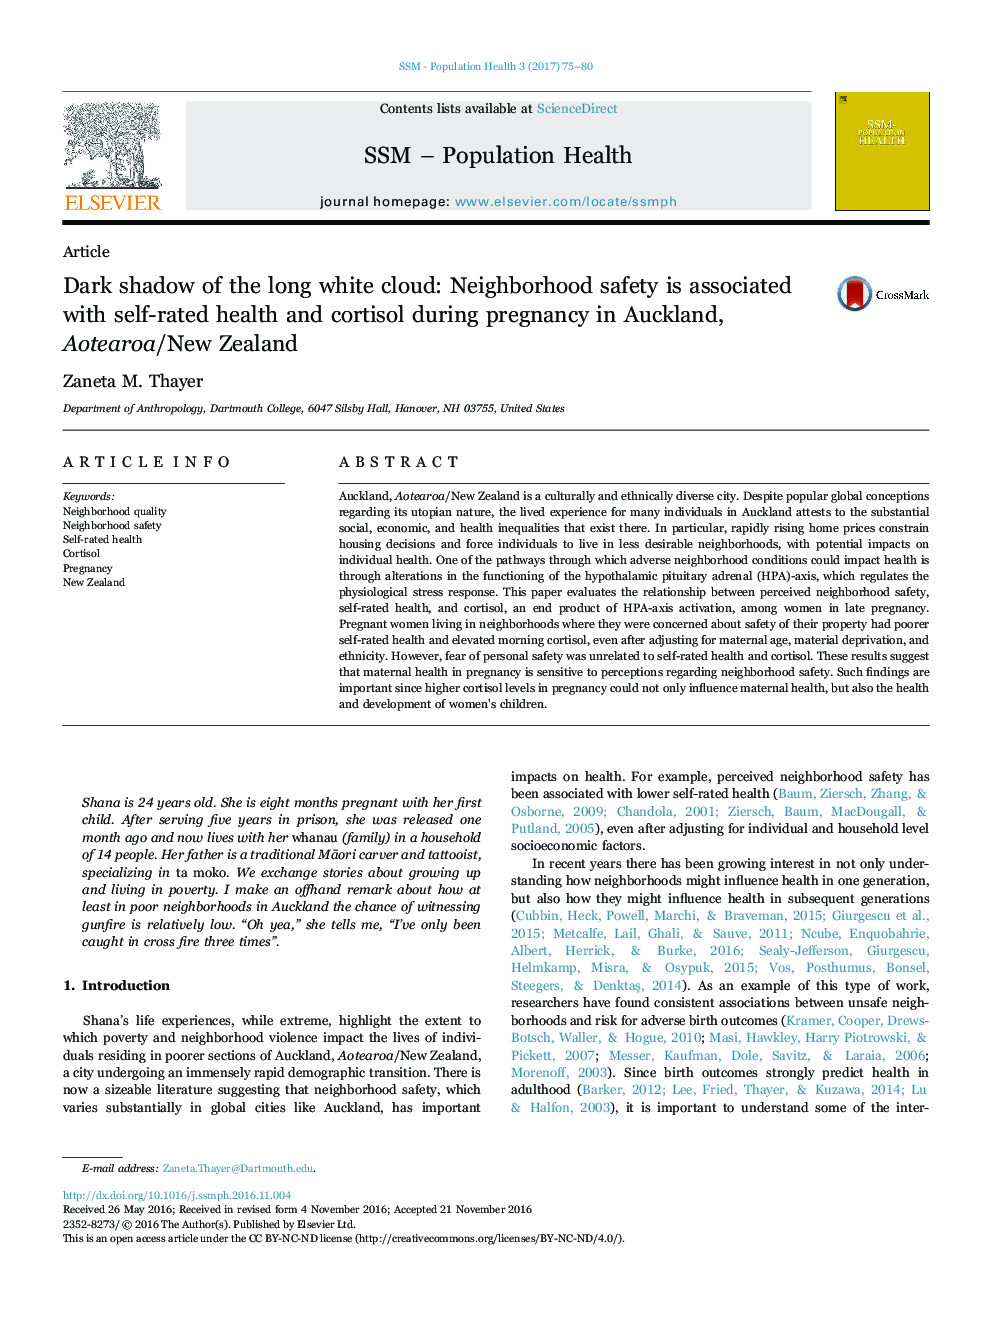 Dark shadow of the long white cloud: Neighborhood safety is associated with self-rated health and cortisol during pregnancy in Auckland, Aotearoa/New Zealand